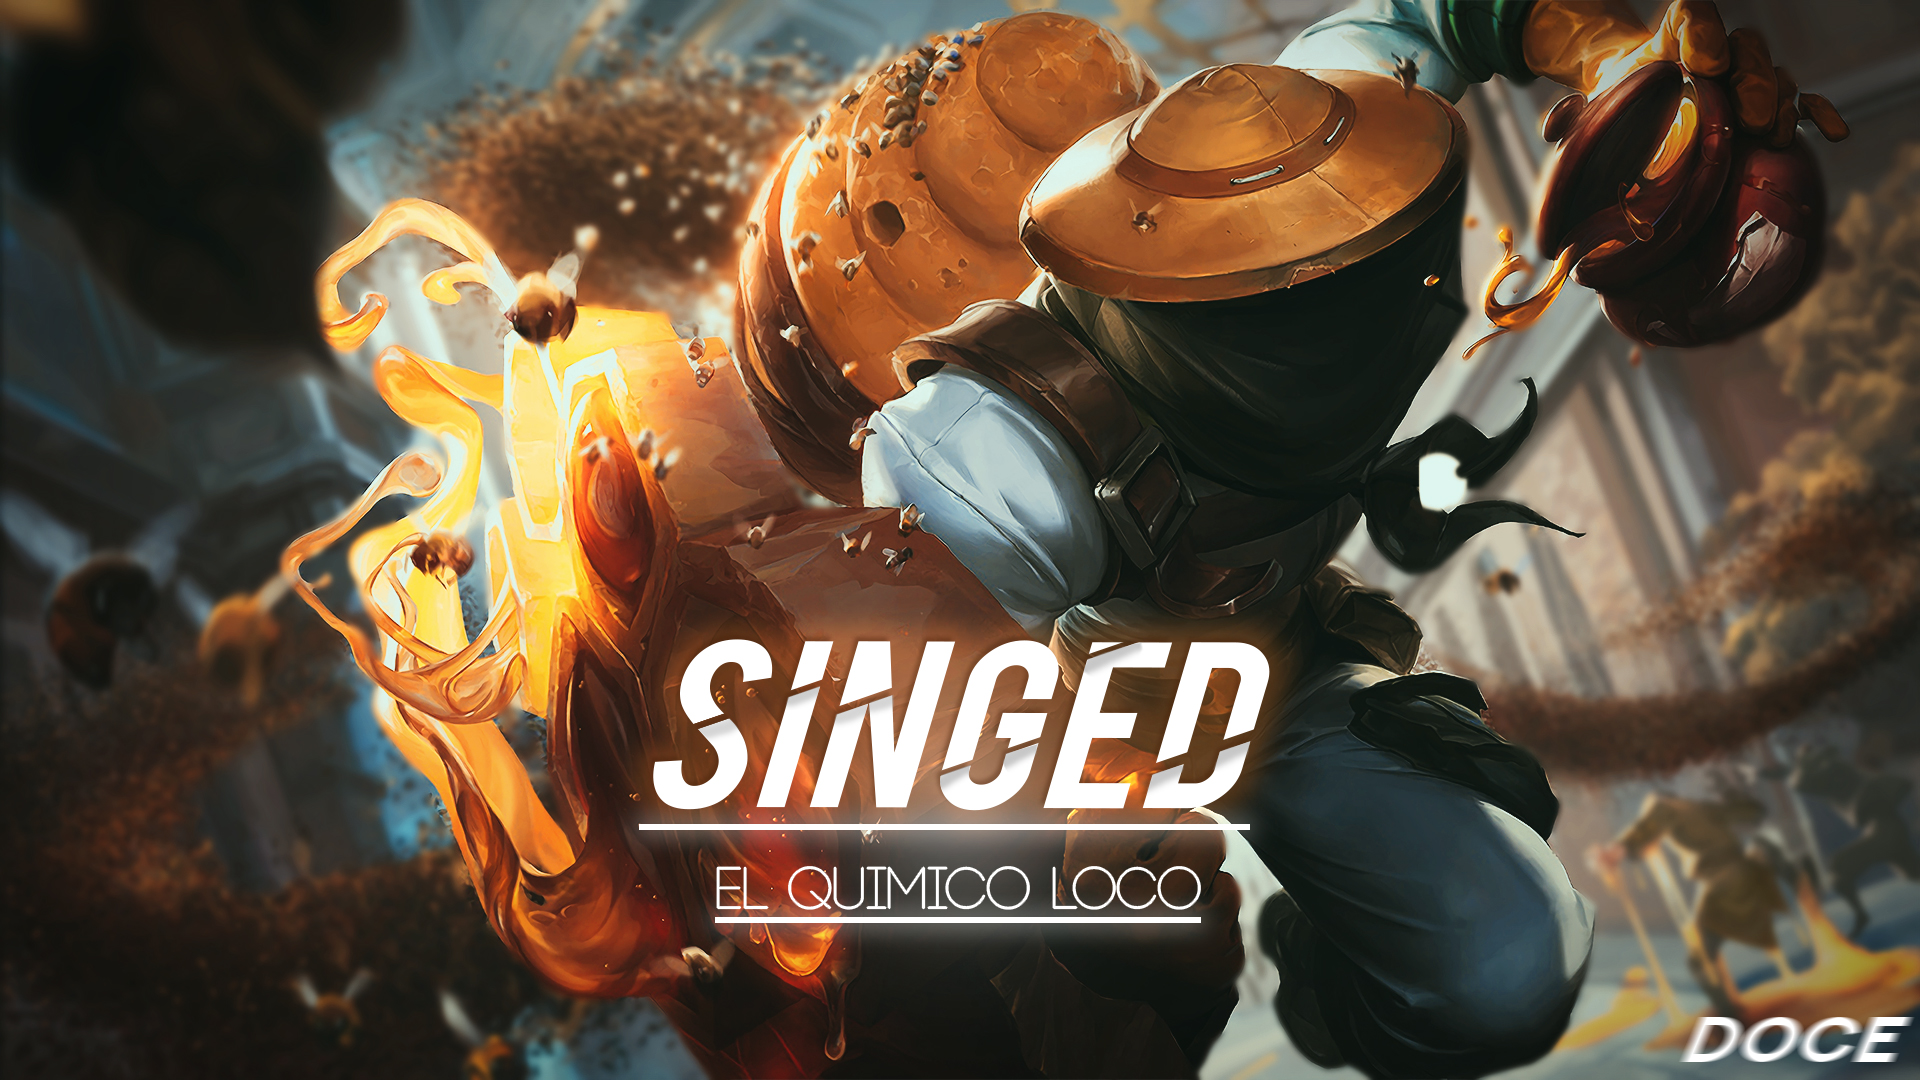 General 1920x1080 League of Legends PC gaming warrior digital art watermarked Spanish Singed (League of Legends)